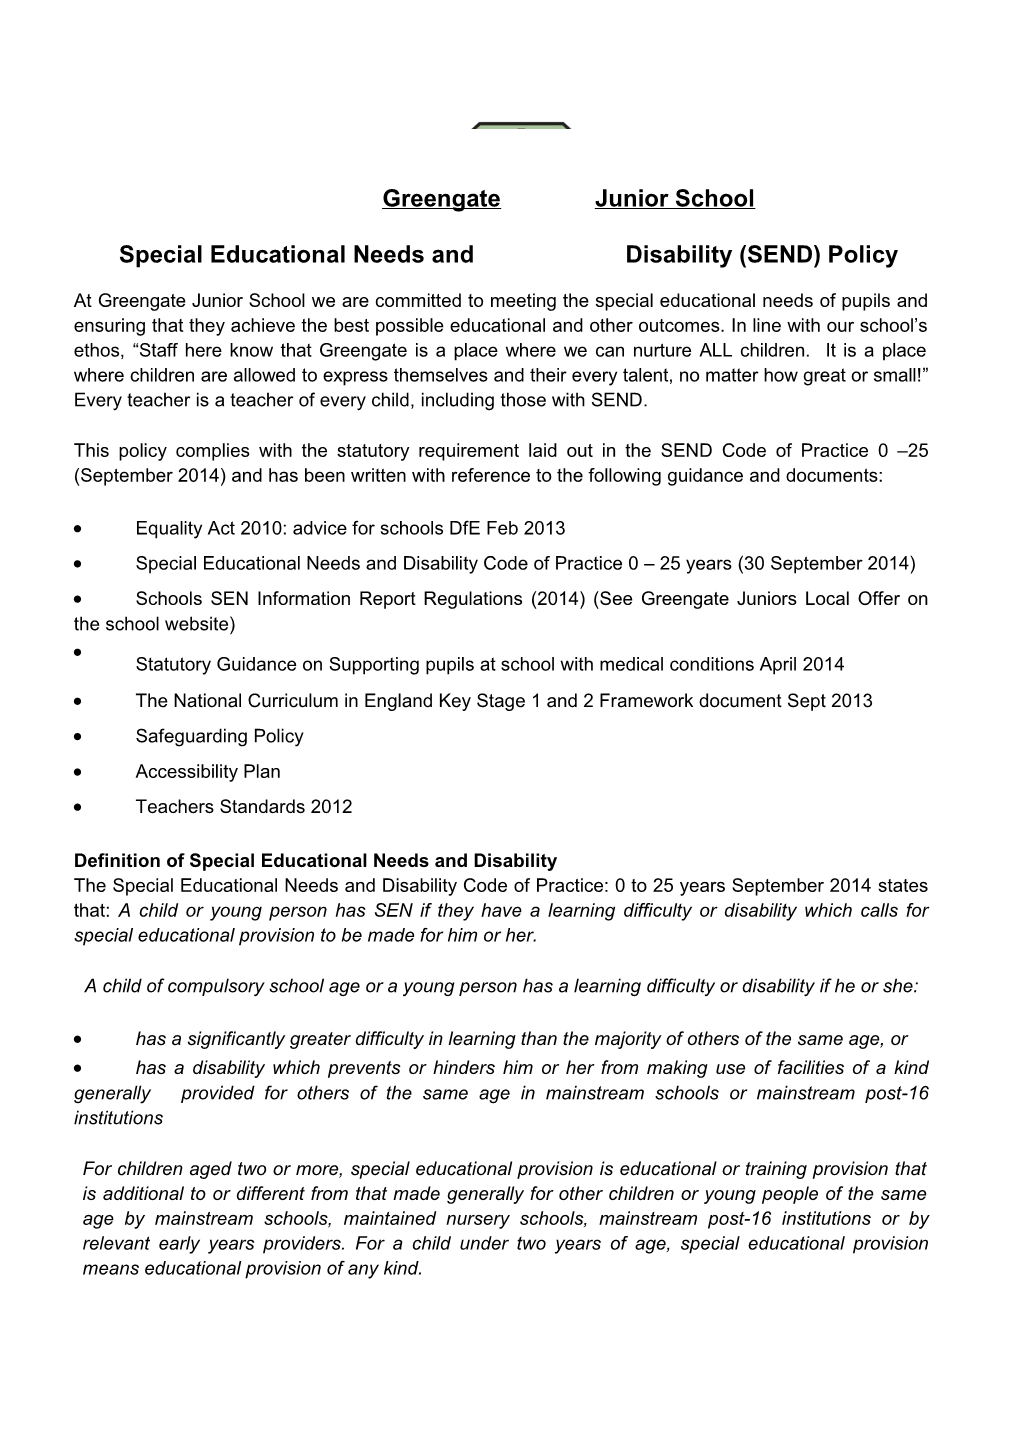 Specialeducationalneedsand Disability(SEND) Policy